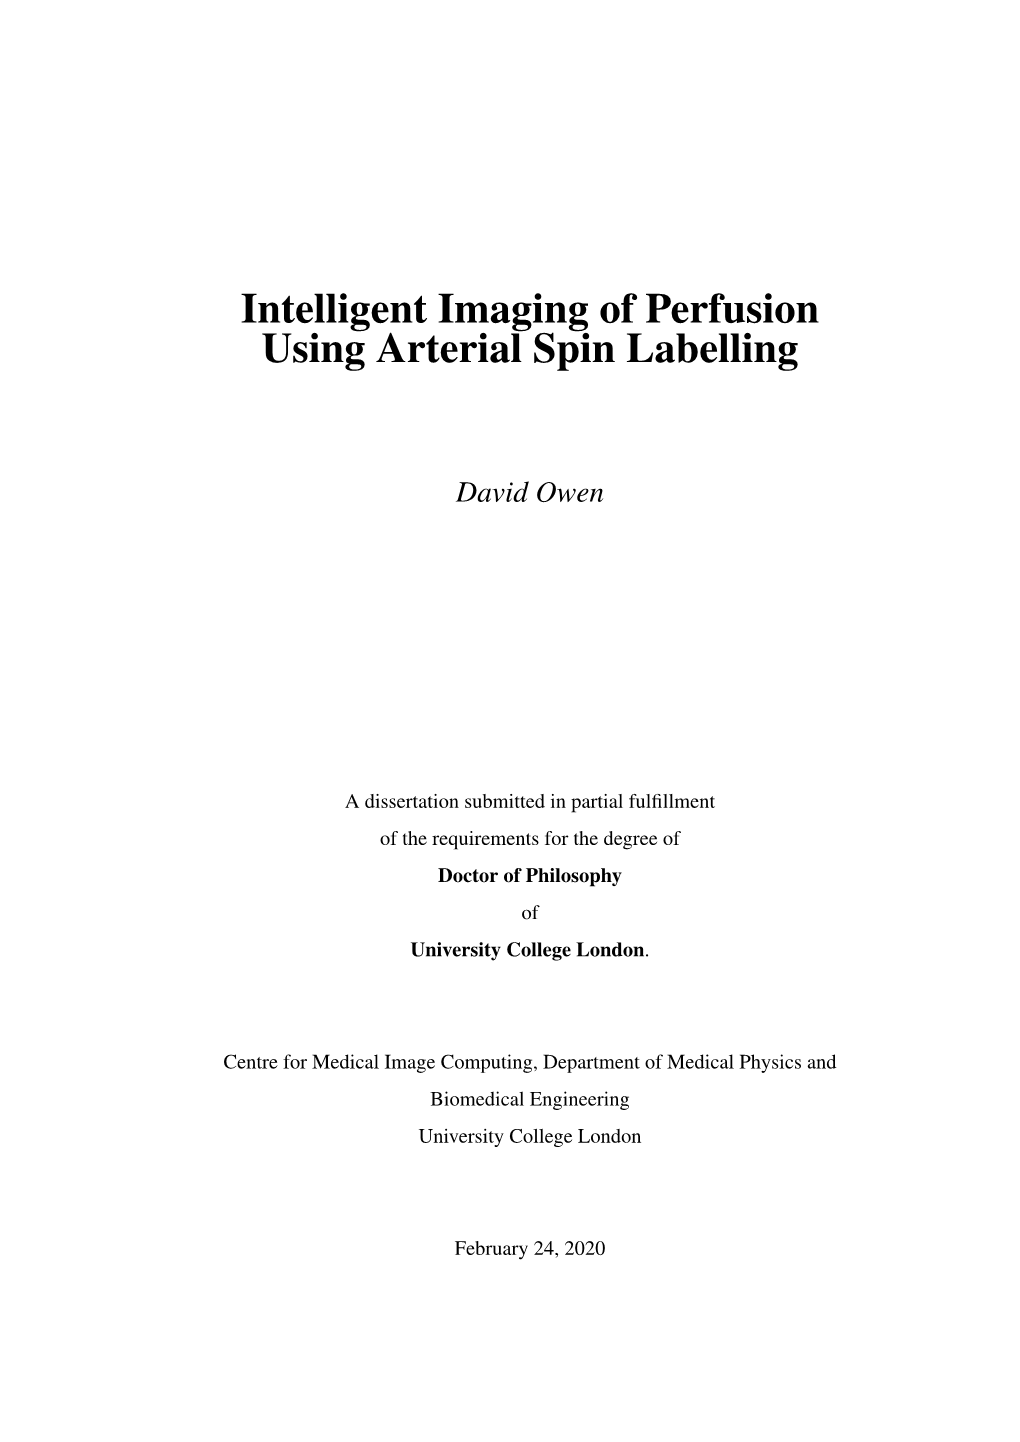 Intelligent Imaging of Perfusion Using Arterial Spin Labelling